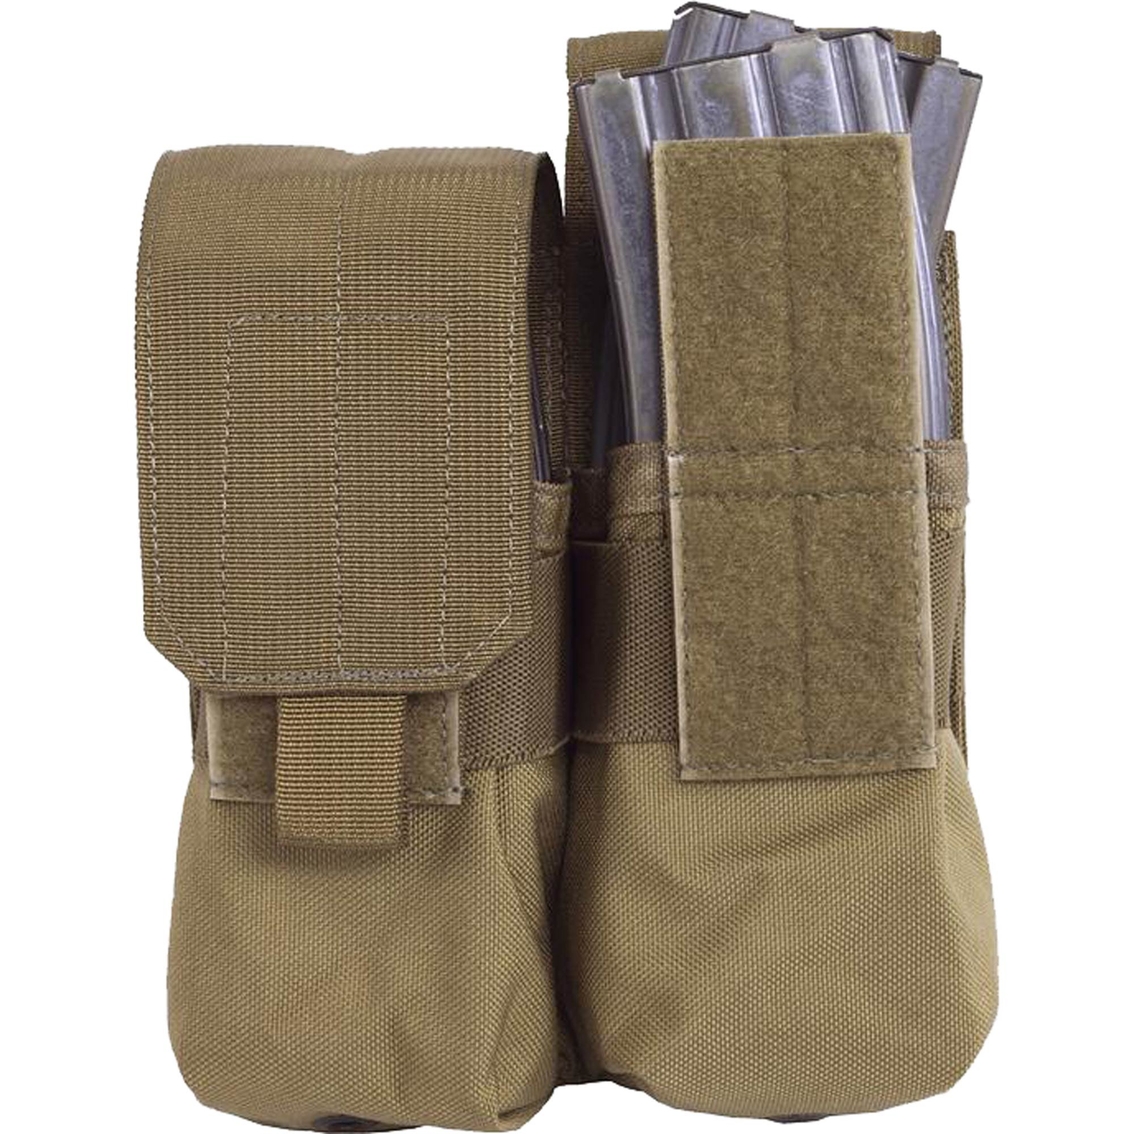 Elite Molle Double A/r Mag Pouch | Range Bags, Packs & Pouches | Sports ...